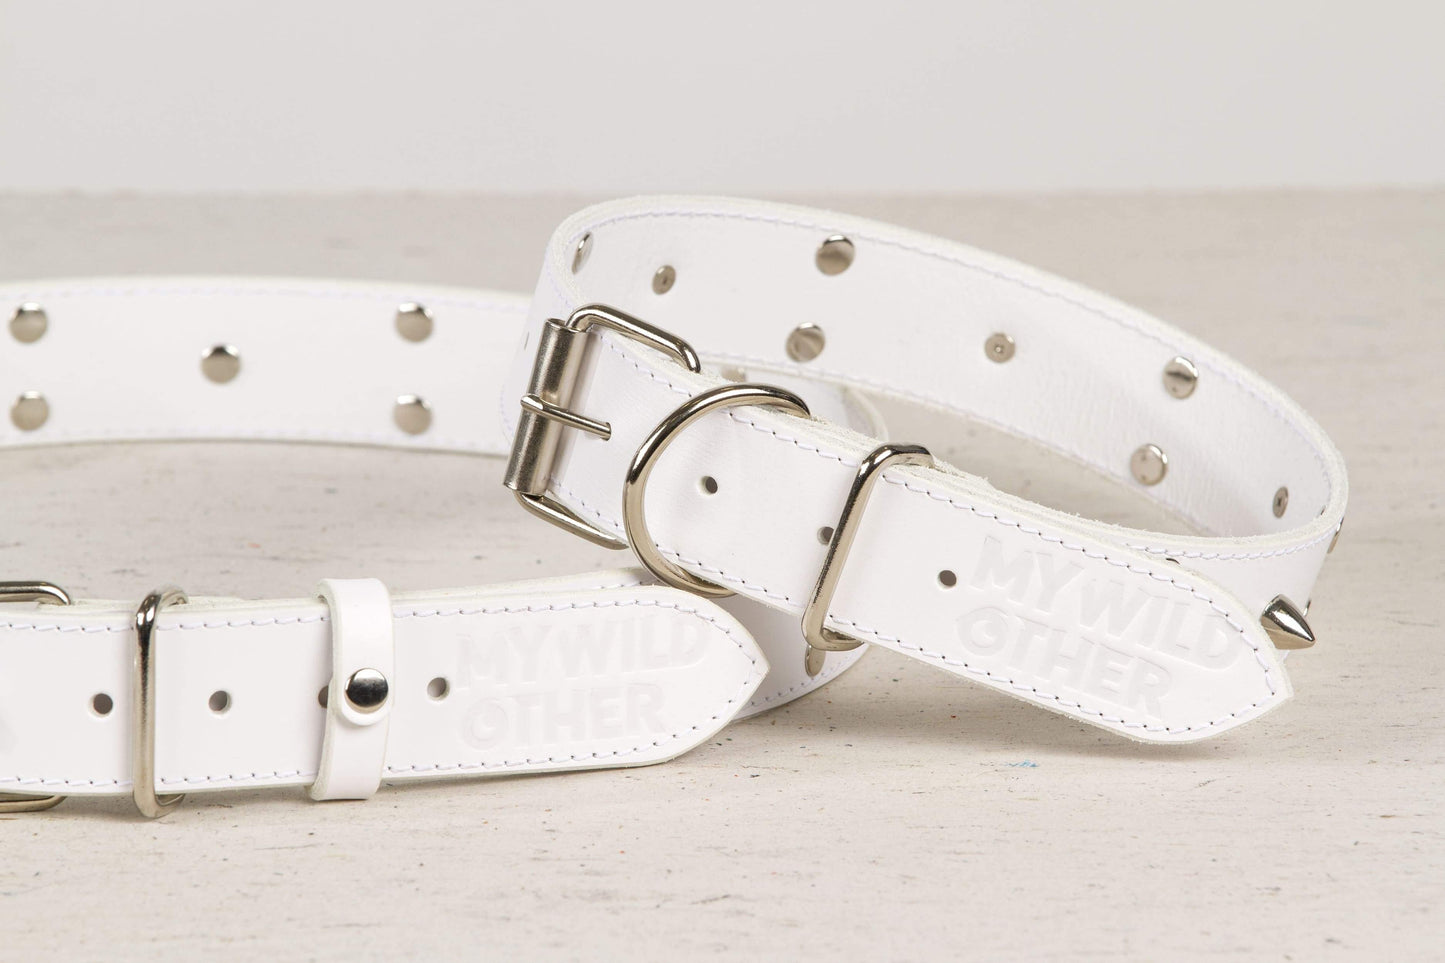 Handmade white leather STUDDED dog collar - premium dog goods handmade in Europe by My Wild Other